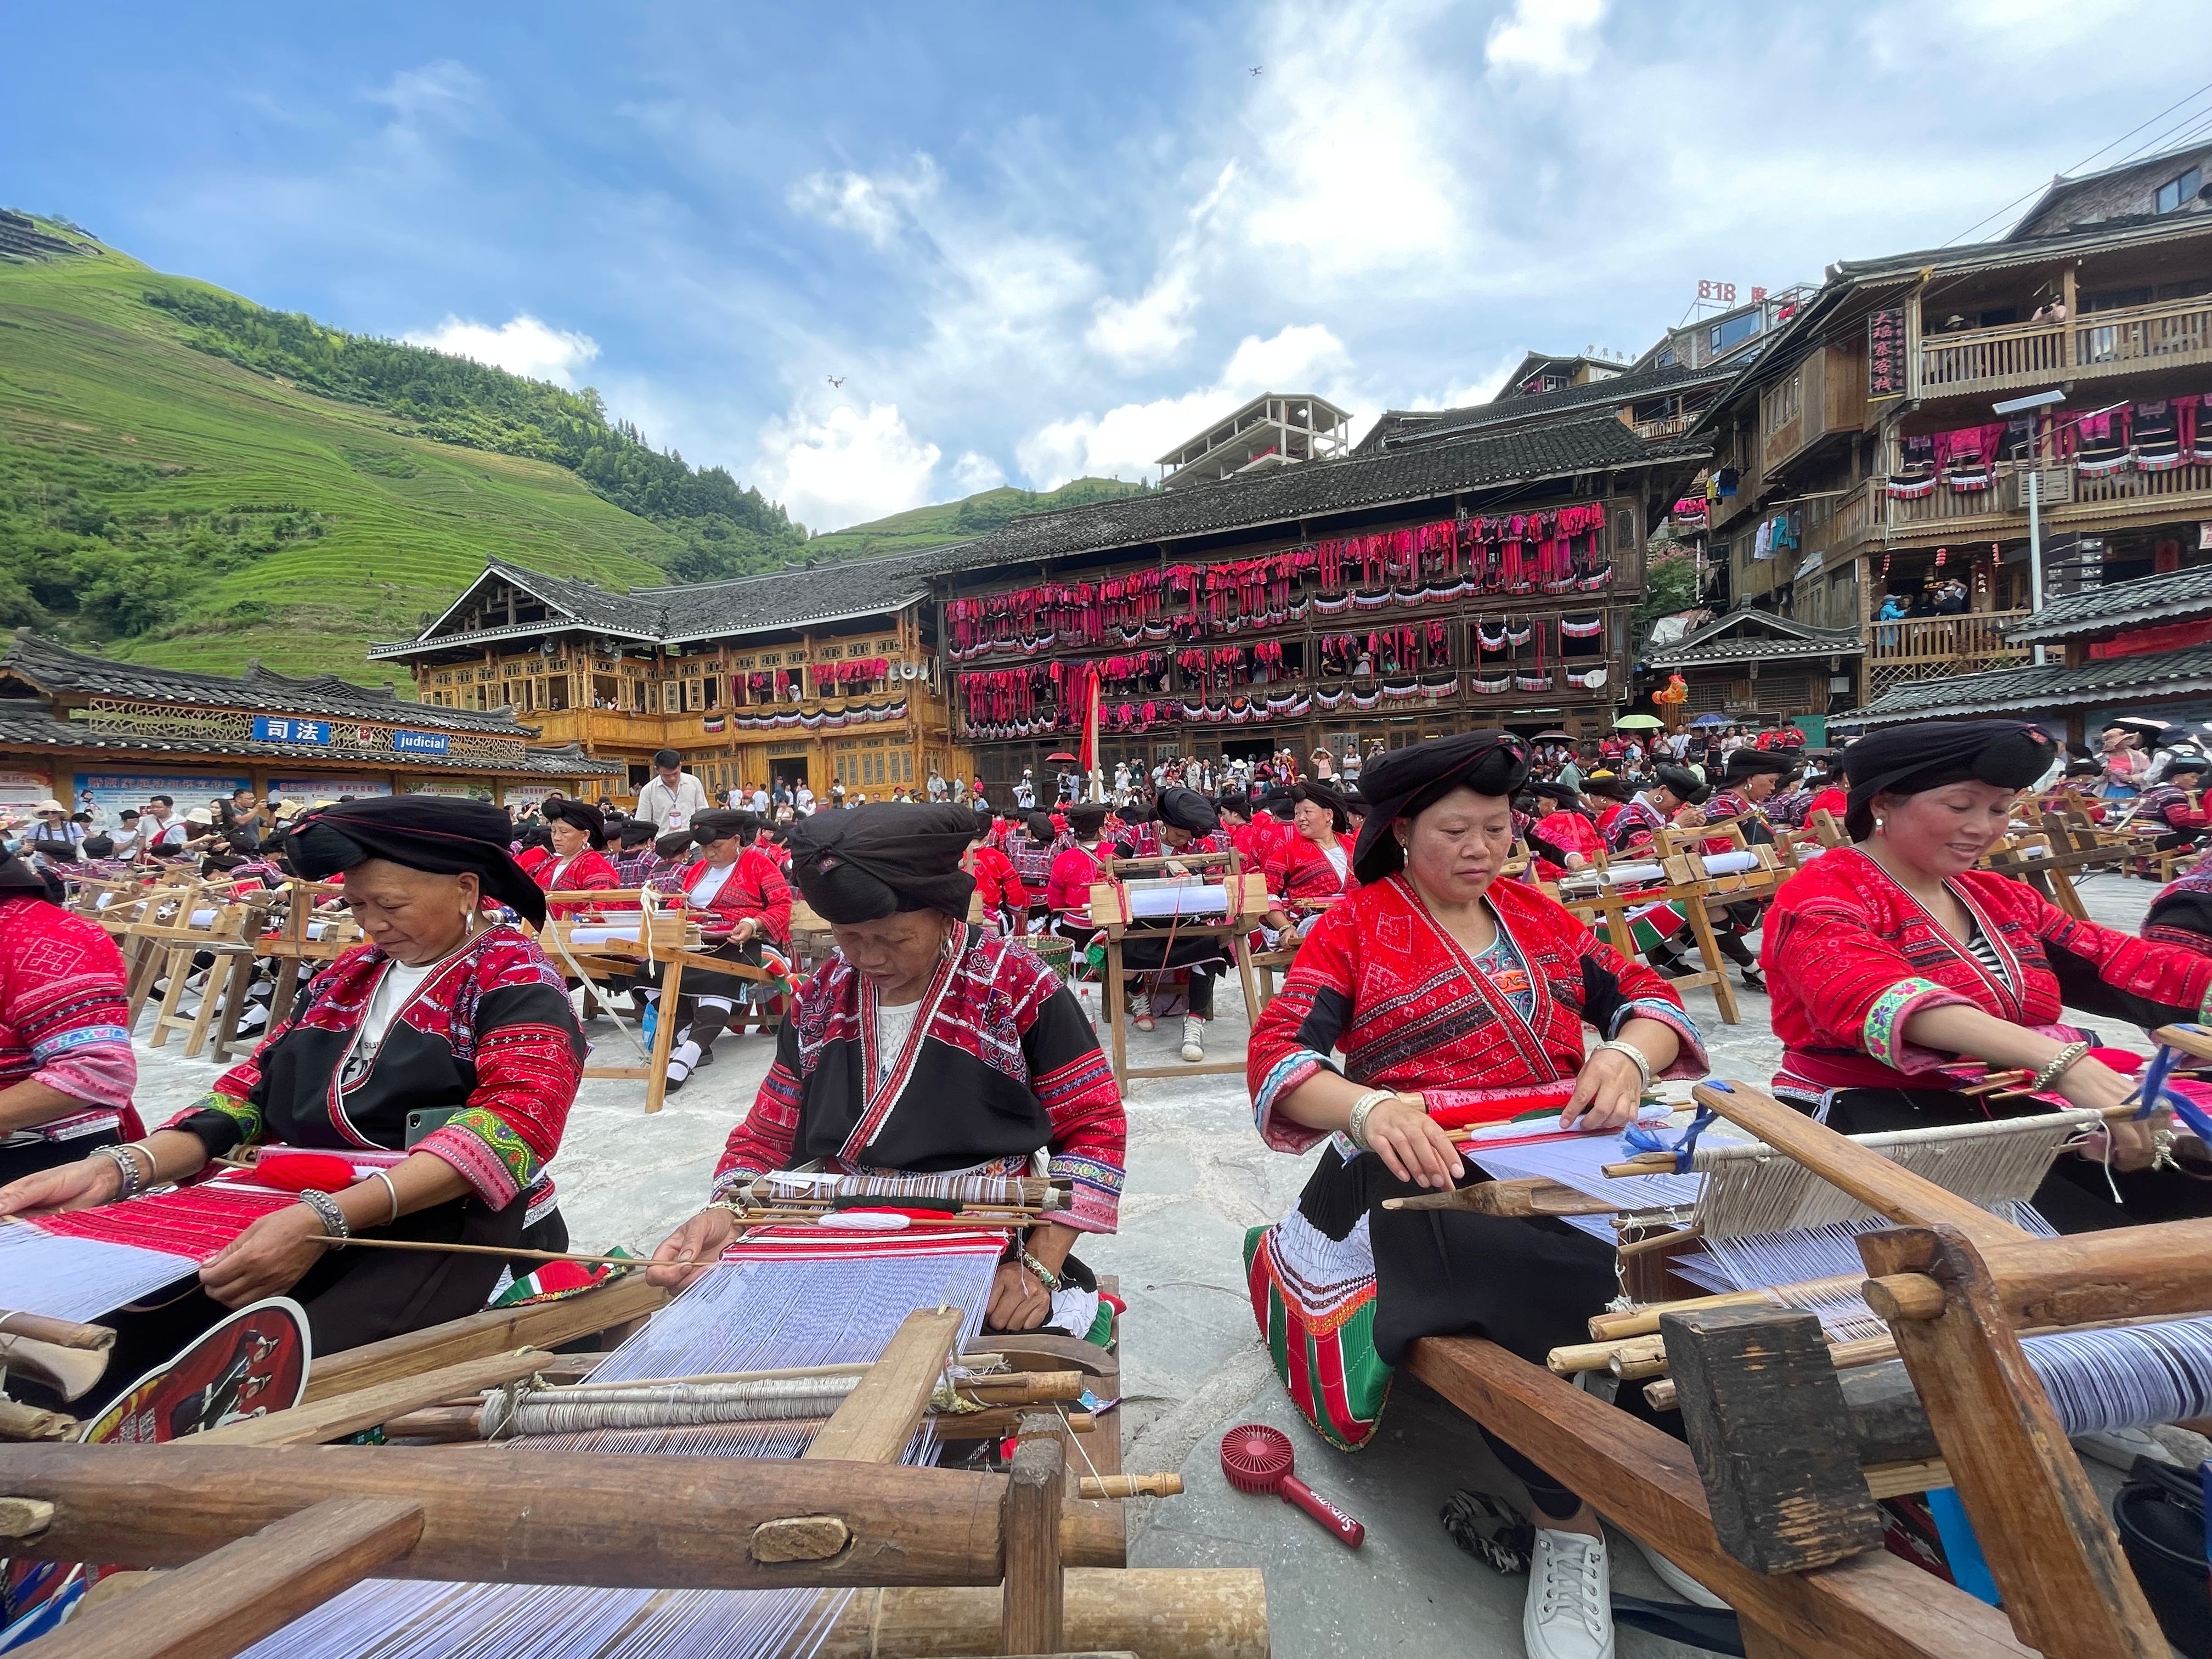 Red Yao sewing and weaving demonstration at the annual 'Clothes Hanging' festival.